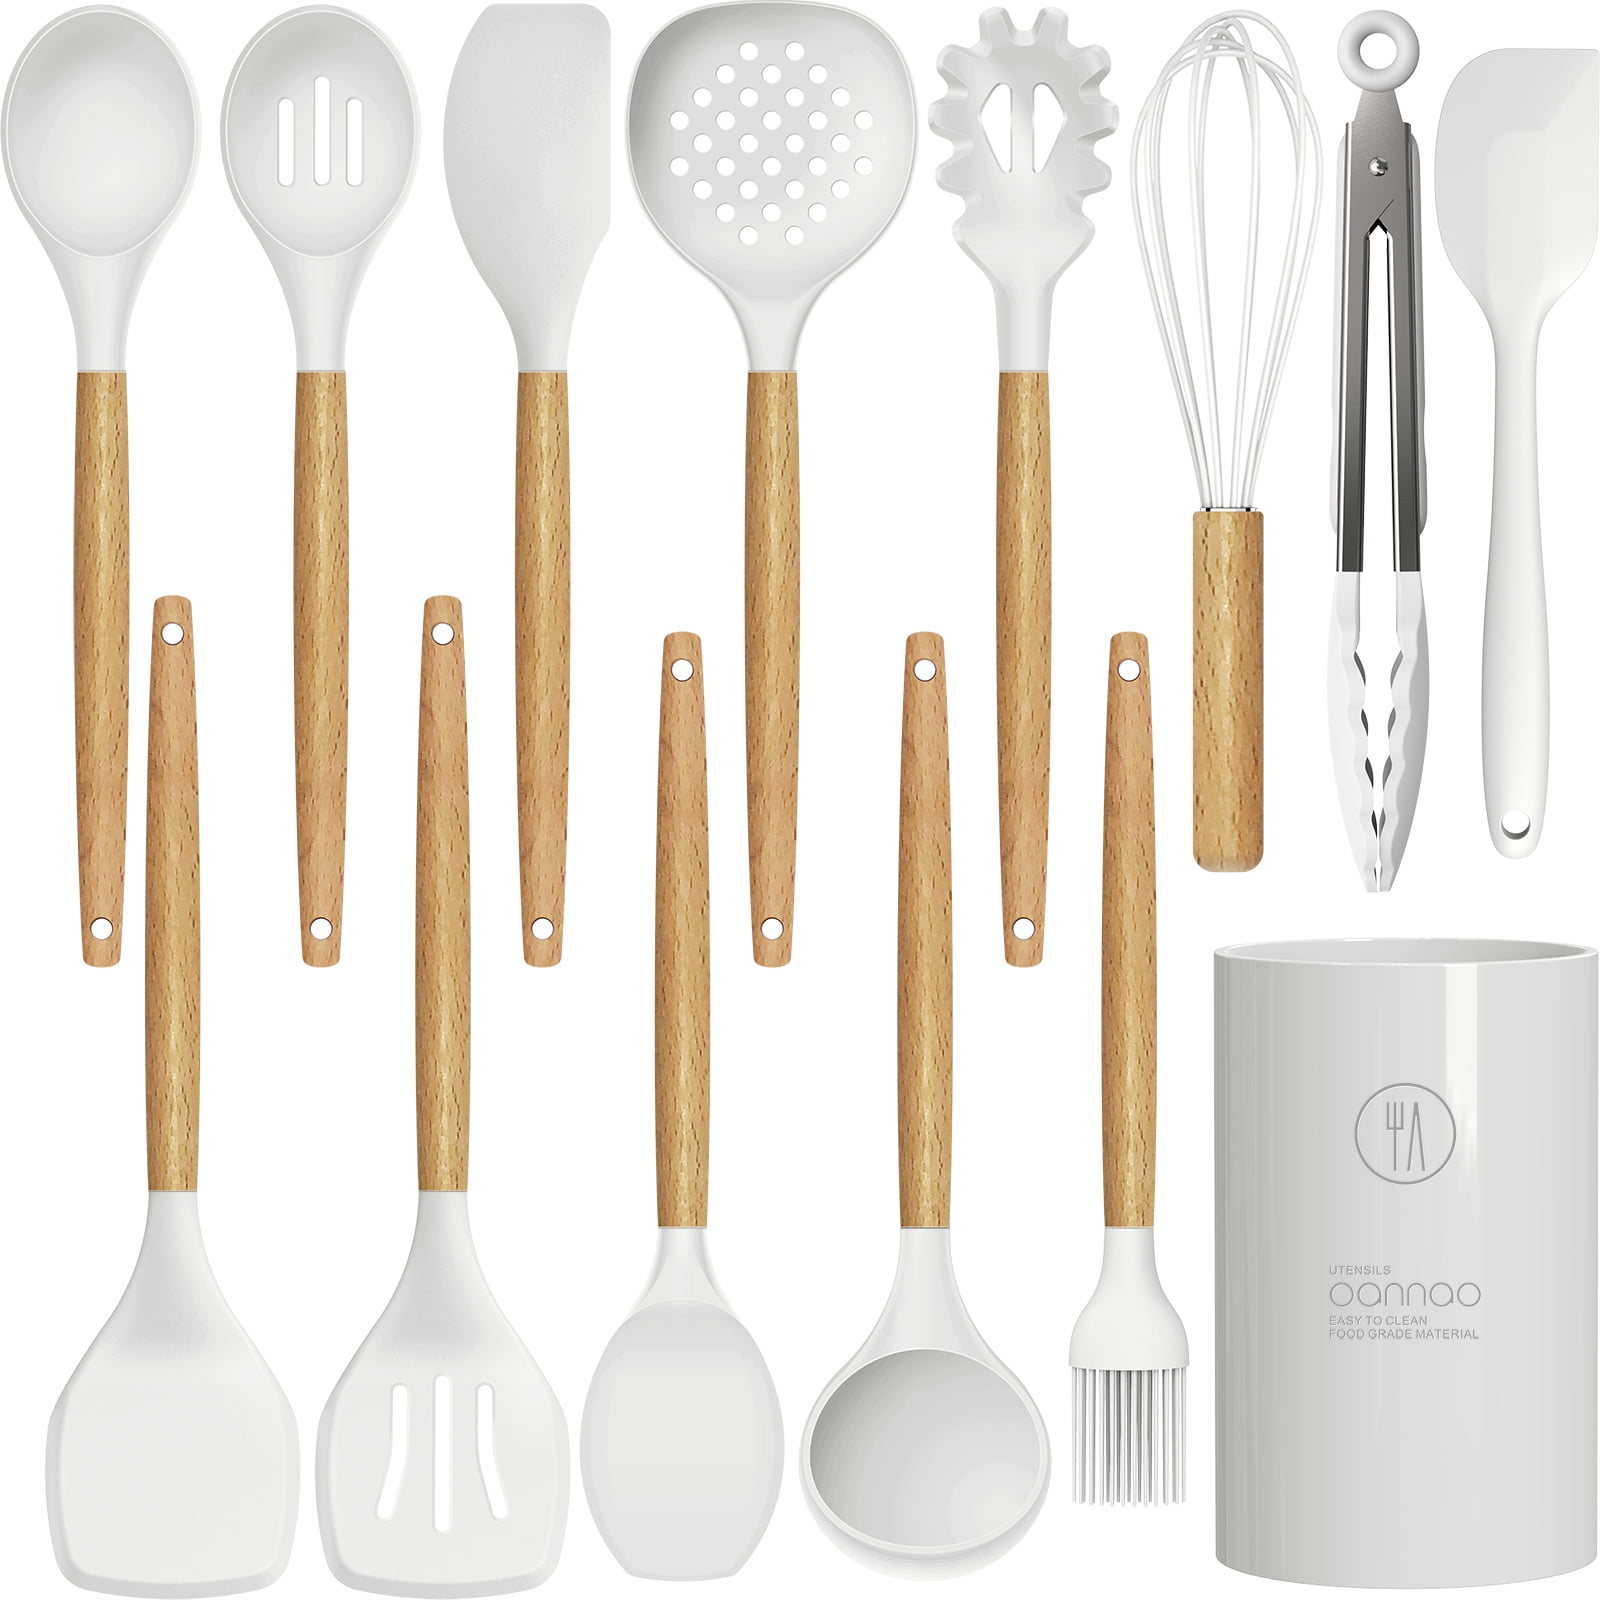 Silicone Cooking Utensils Set - 446°F Heat Resistant Silicone Kitchen  Utensils for Cooking,Kitchen Utensil Spatula Set w Wooden Handles and  Holder, BPA FREE Gadgets for Non-Stick Cookware (White) 